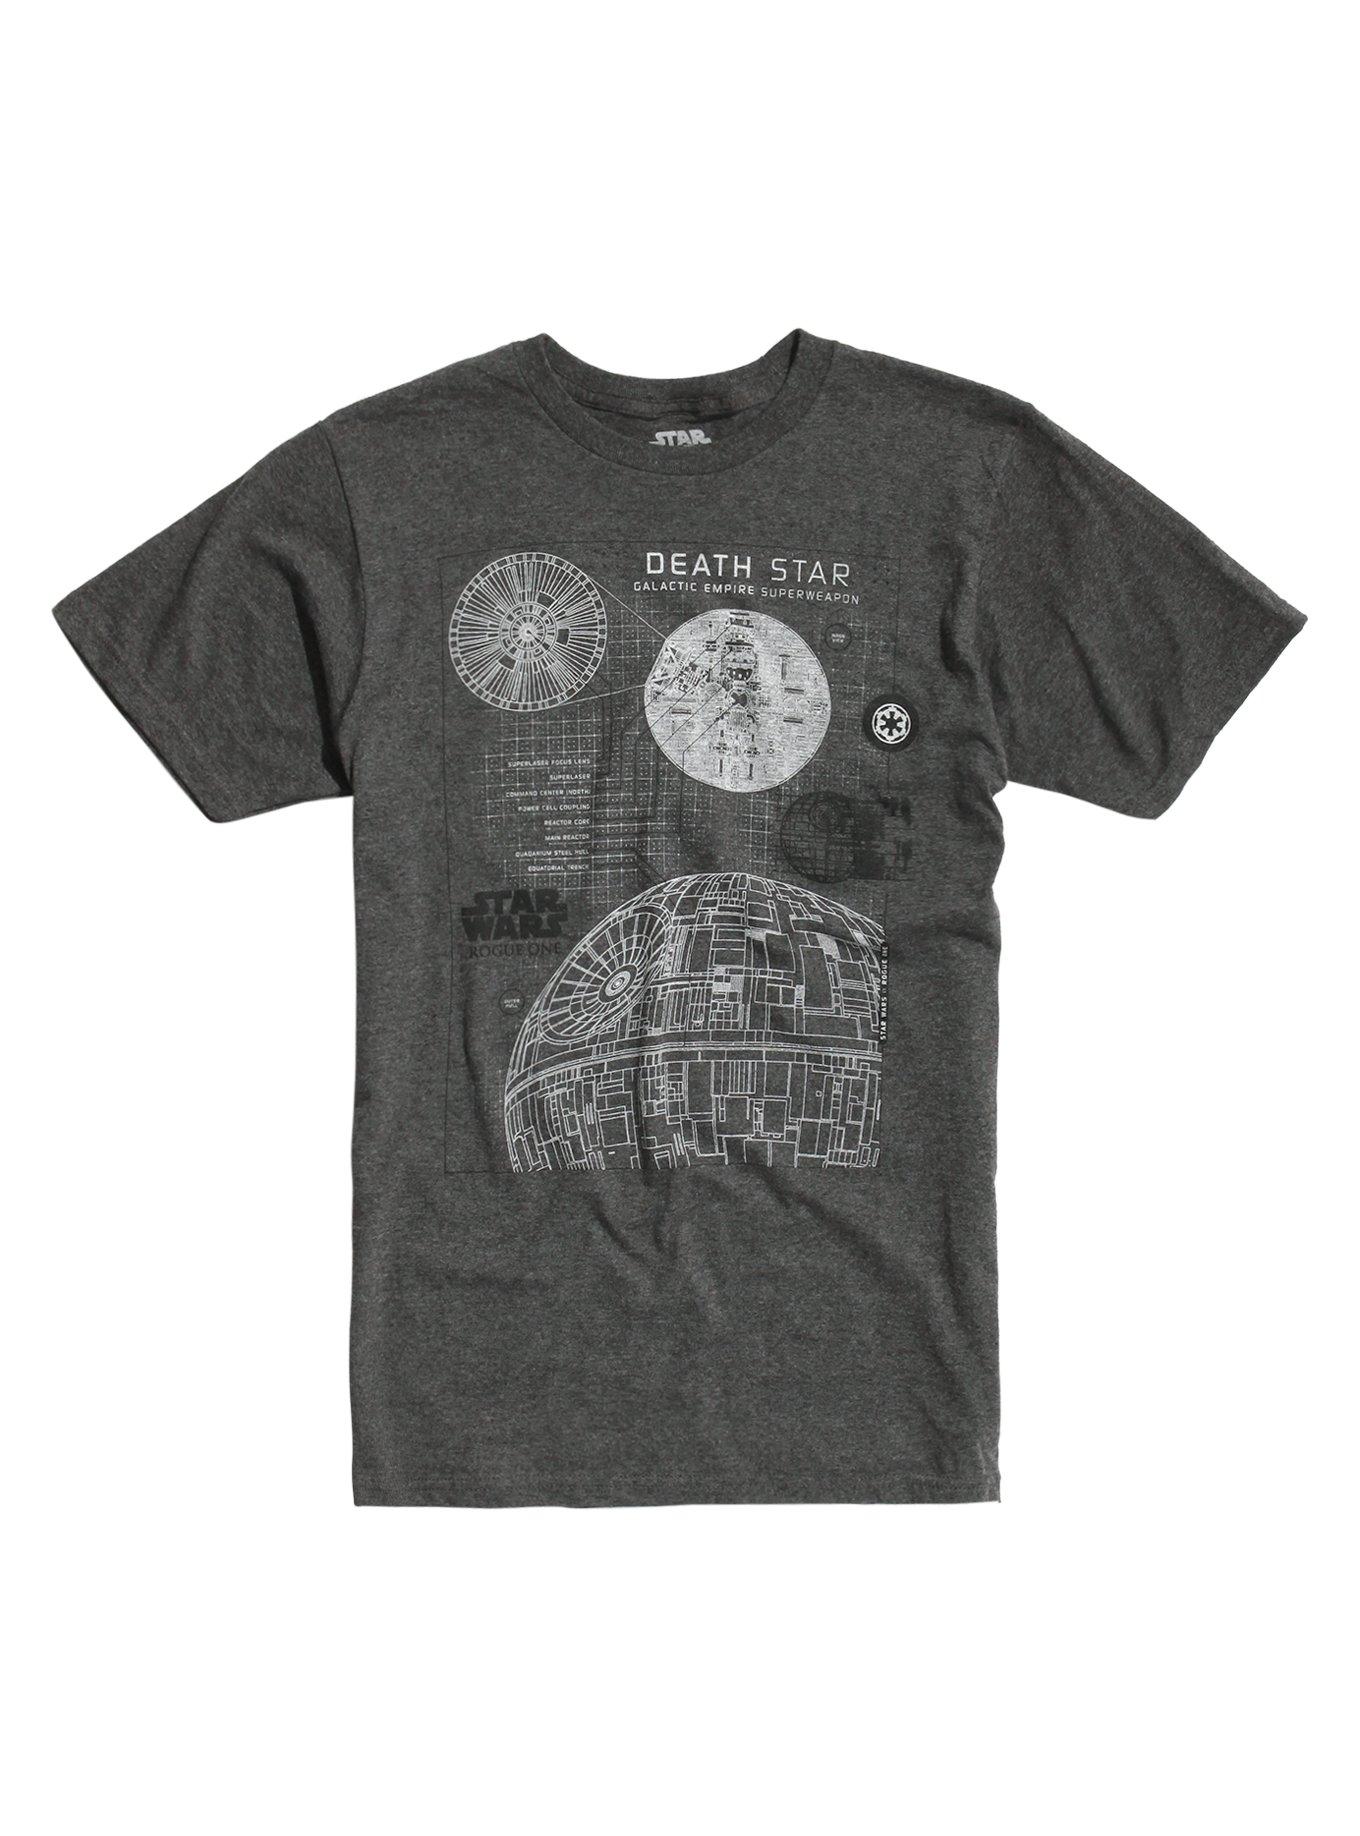 Star Wars Rogue One Death Star Schematic T-Shirt | Hot Topic